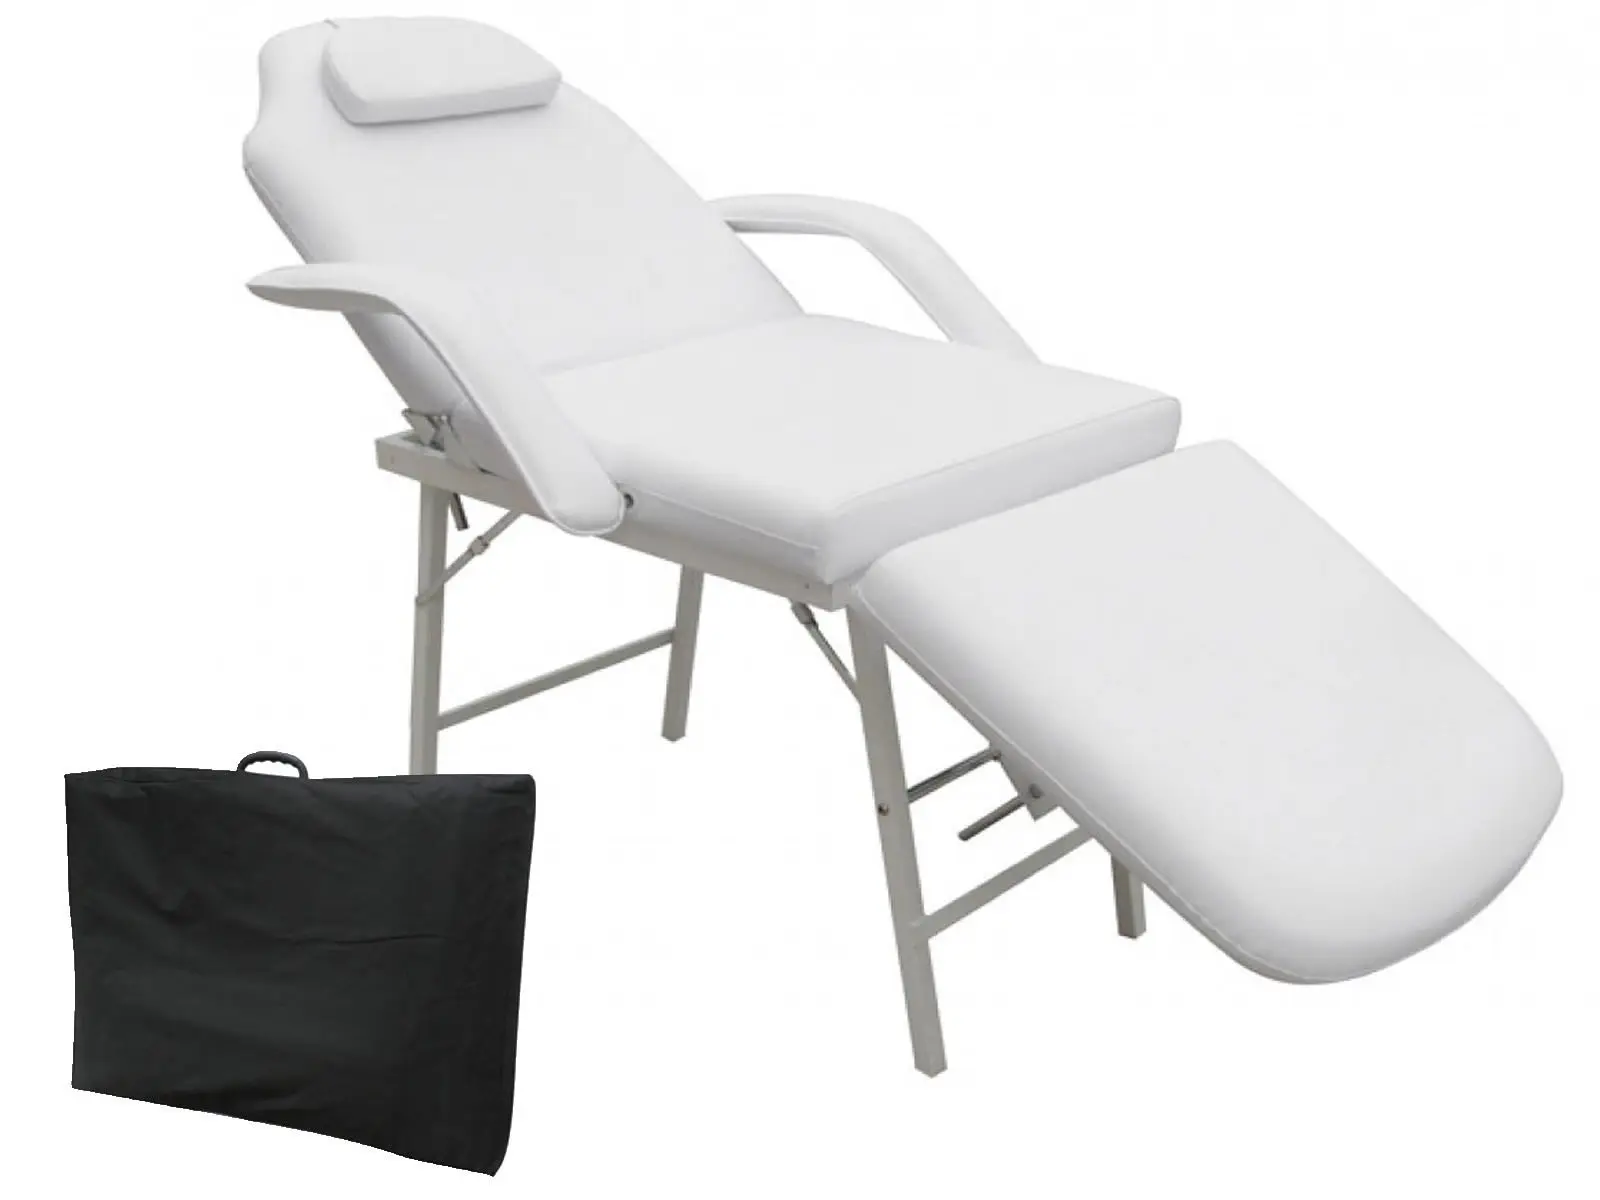 Costway 73'' Portable Tattoo Parlor Spa Salon Facial Bed Beauty Massage Table Chair HB85026